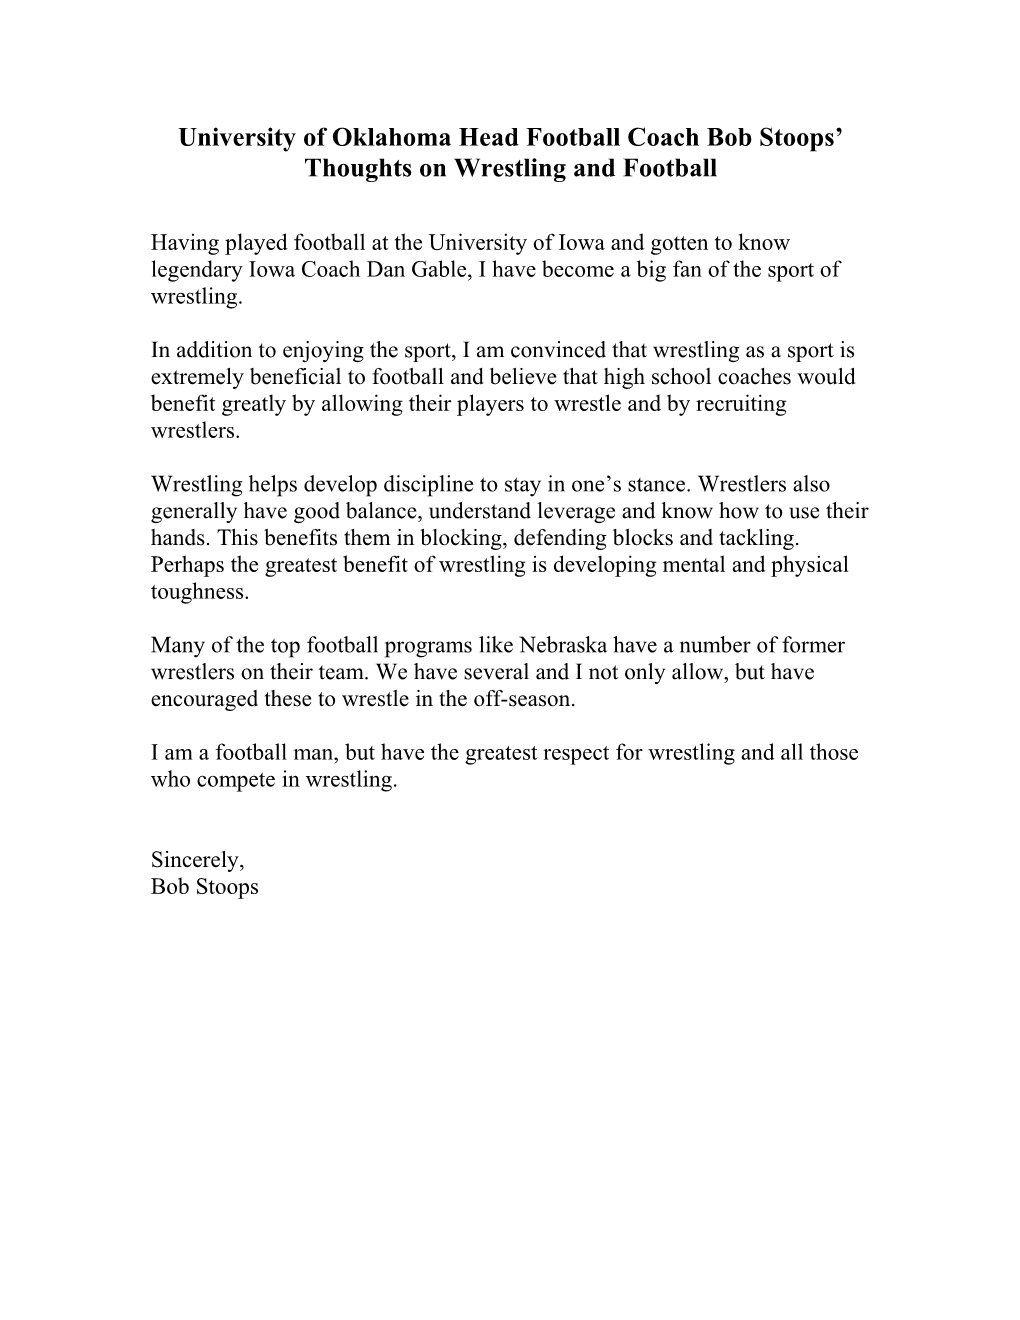 University of Oklahoma Head Football Coach Bob Stoops Thoughts on Wrestling and Football